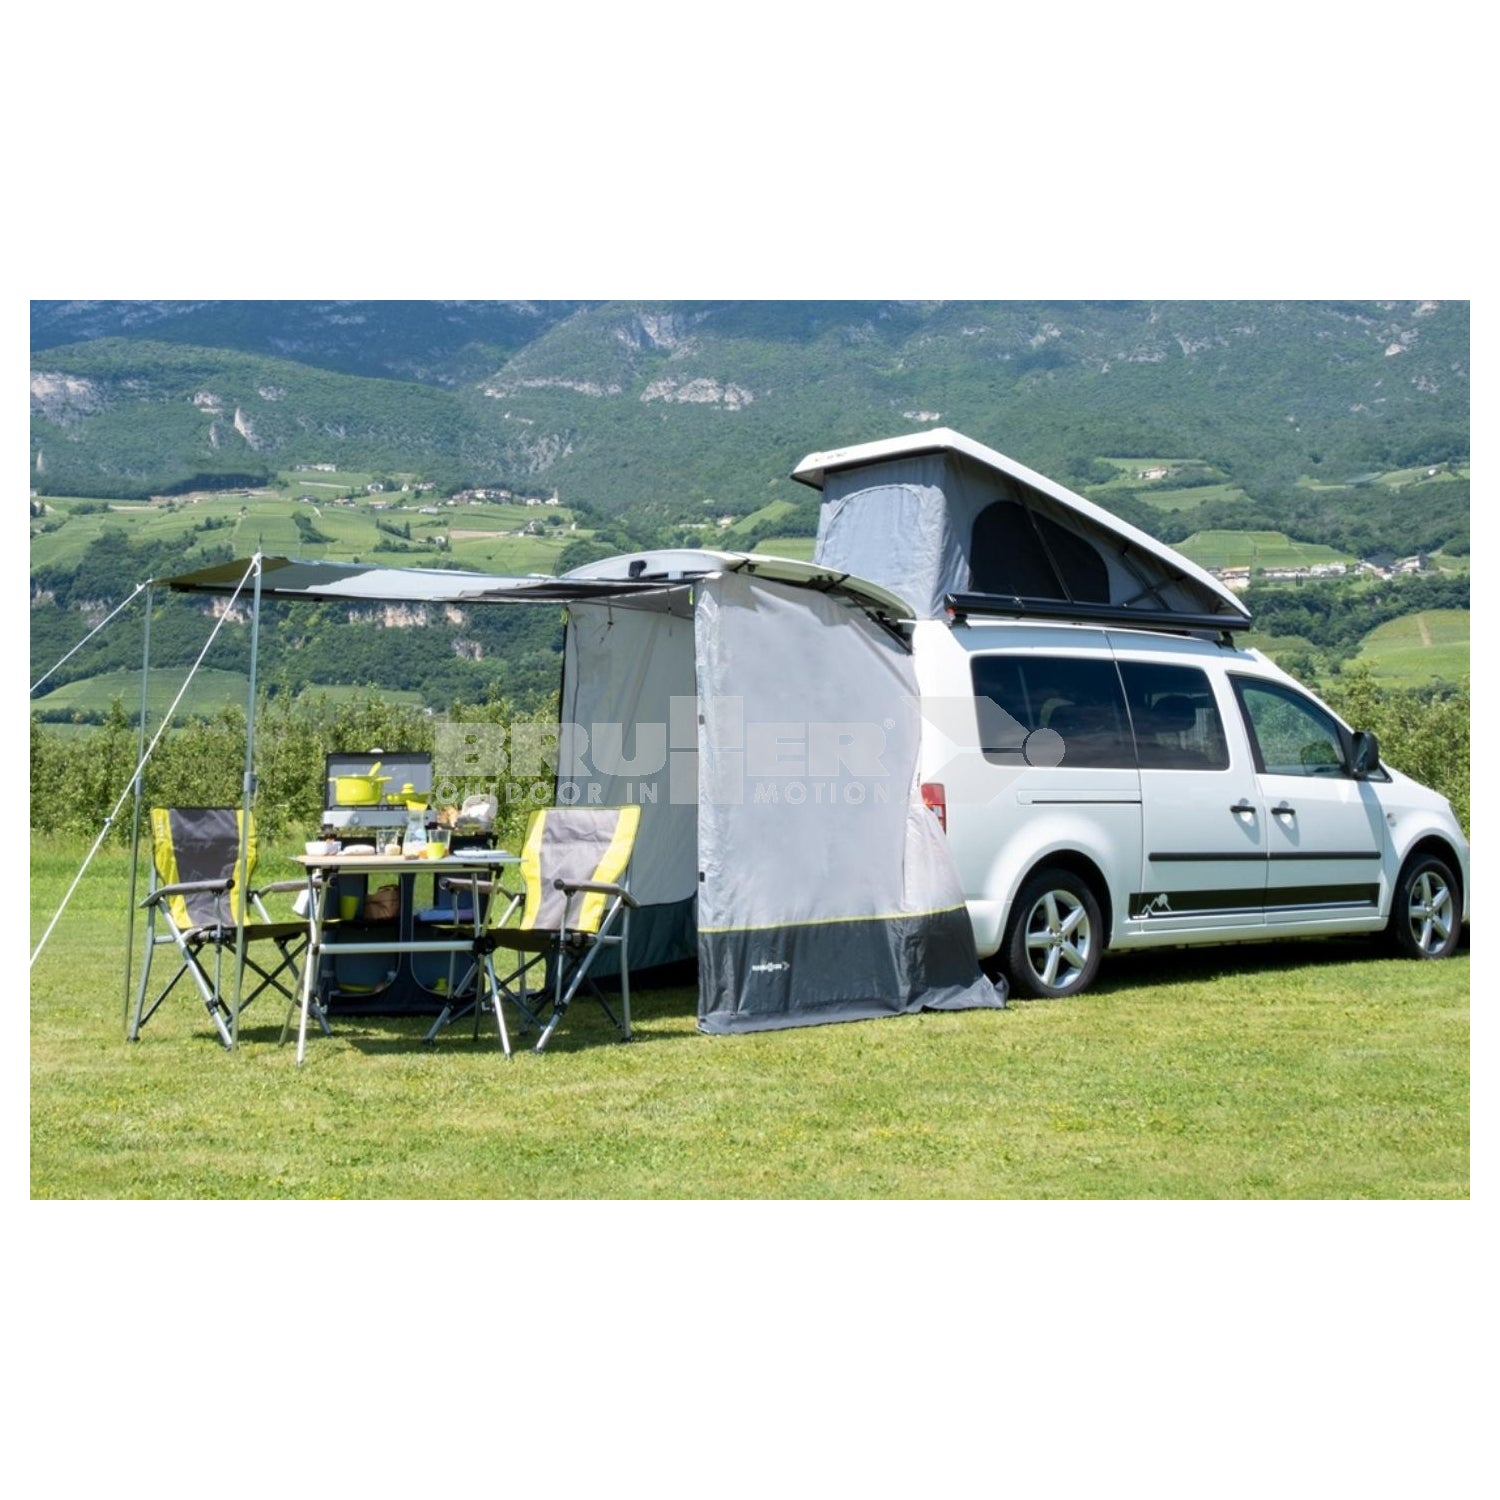 Brunner Pilote Tailgate Awning - VW Caddy